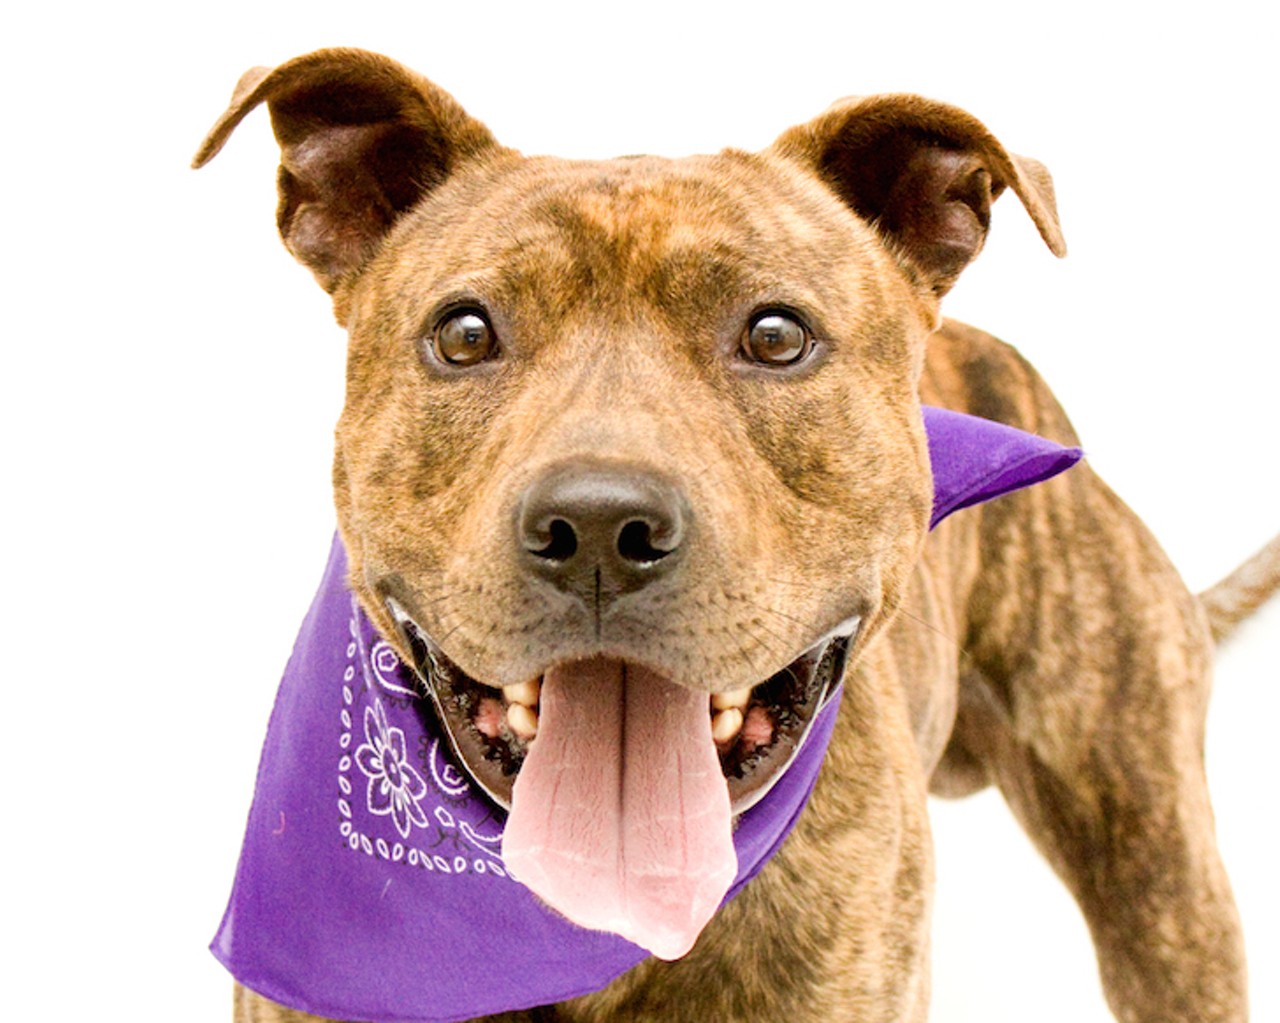 12 darling dogs up for adoption at Orange County Animal Services